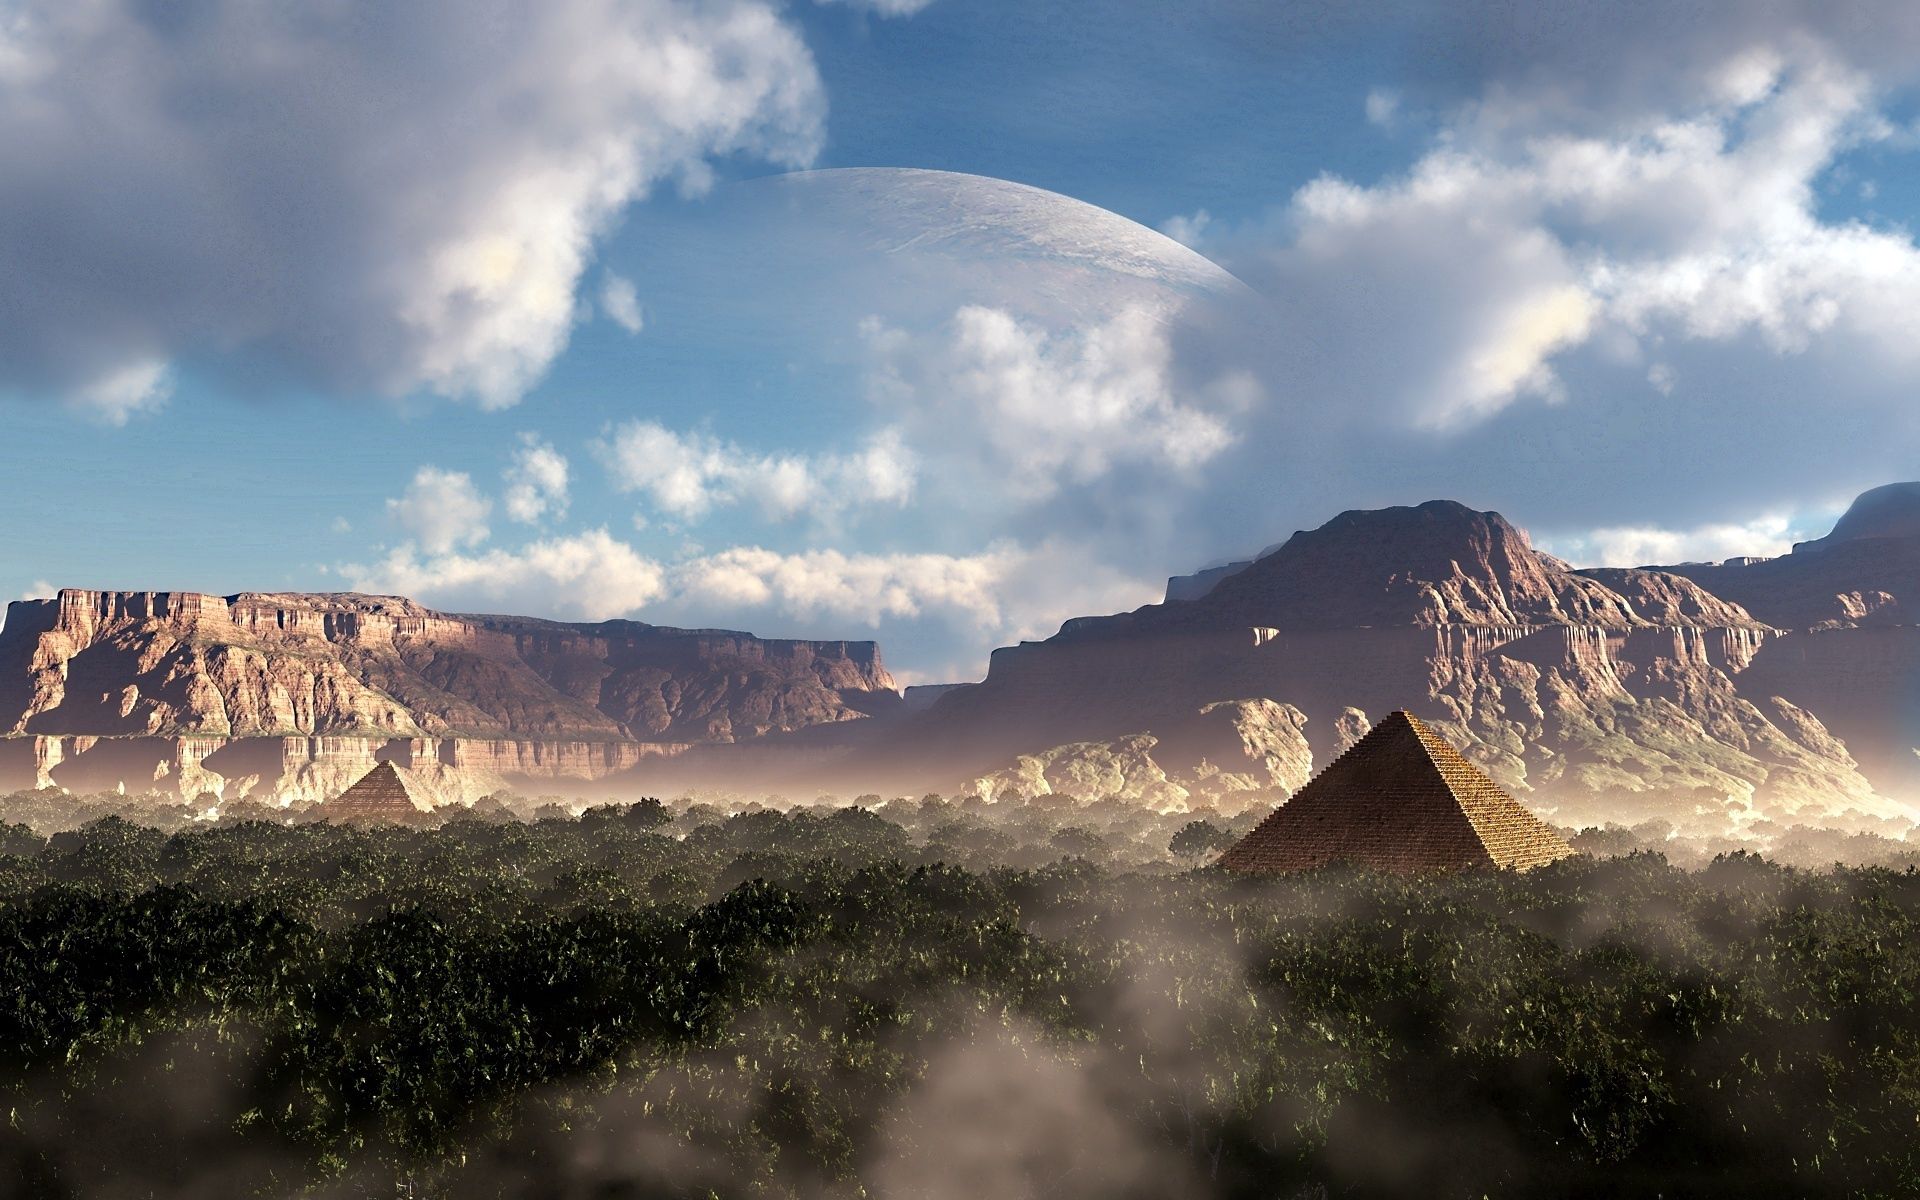 that's incredible, nature, sky, mountains, forest, planet, fiction, canyons, pyramid